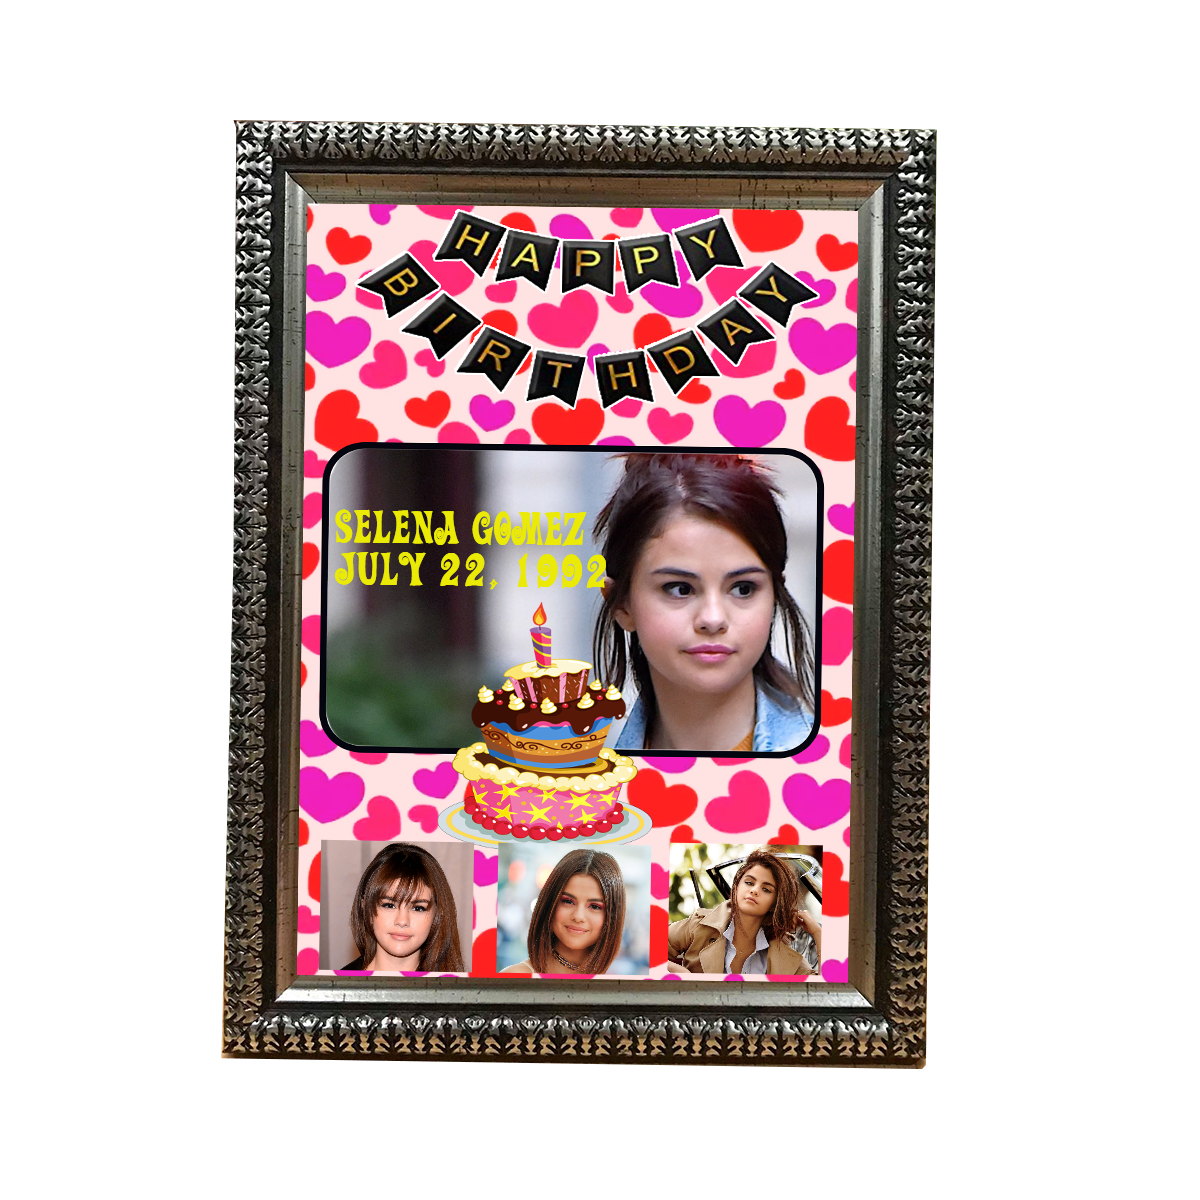 FE-BD1 Personalised Photo Gift Frame Cute Design ( BIRTH DAY ) Gifts Size 6 inch x 8 inch